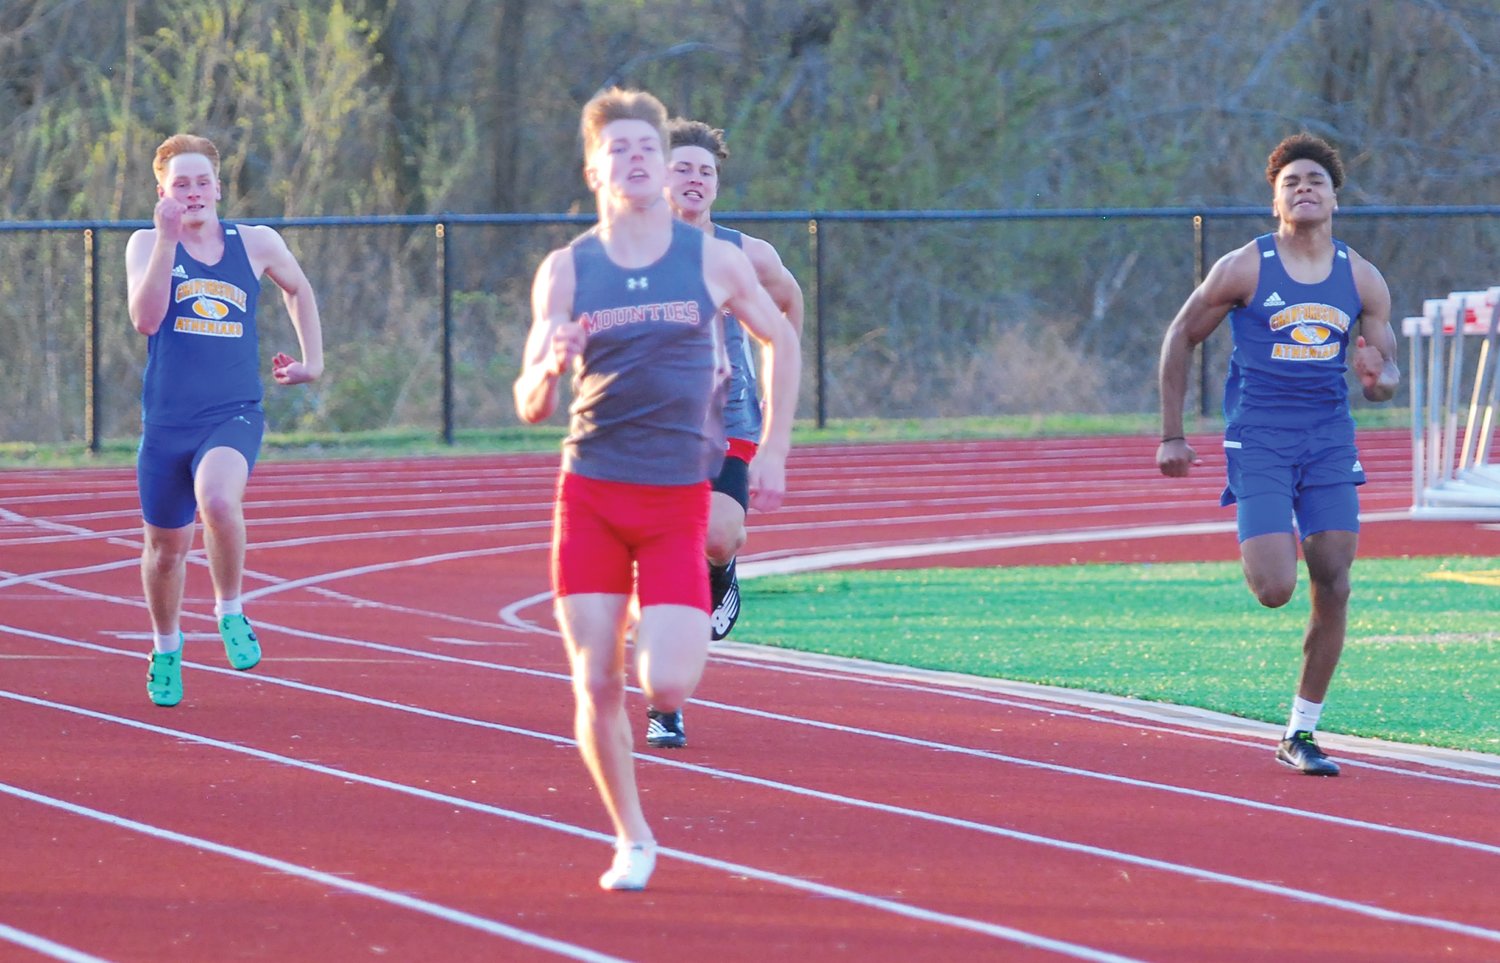 Southmont junior Trent Jones cruised to the win in the 200 meter dash.